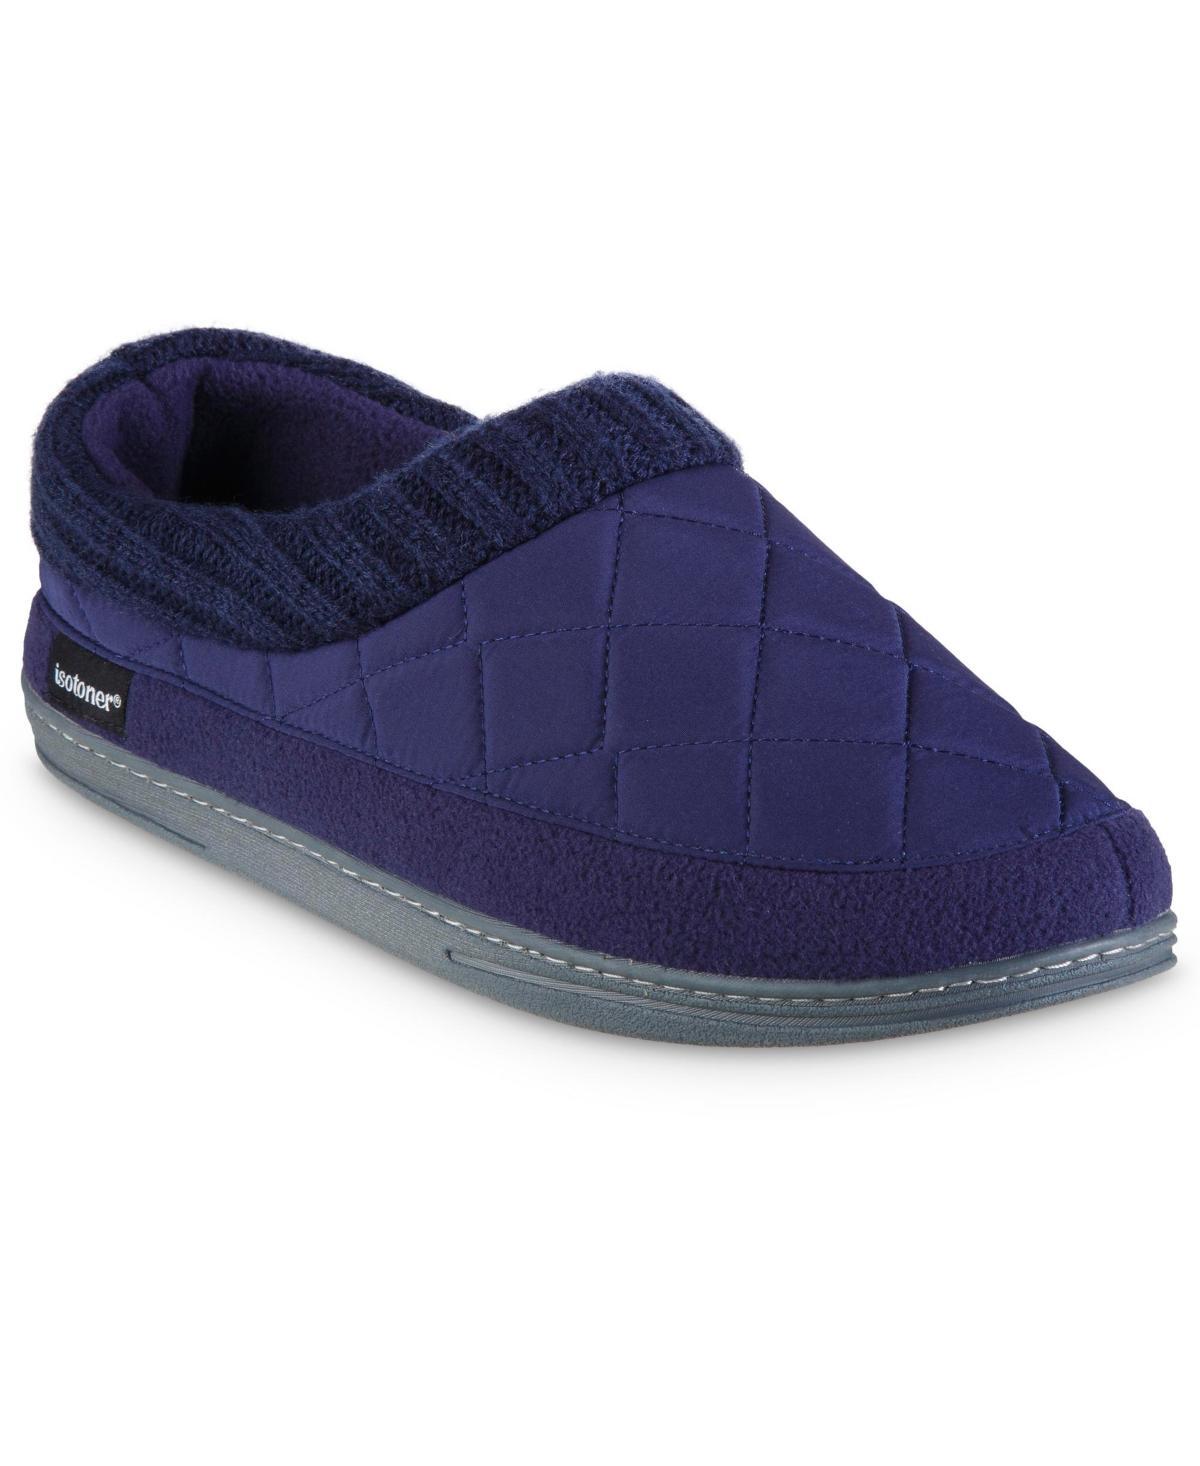 Isotoner Mens Bootie Slippers, X-large Product Image